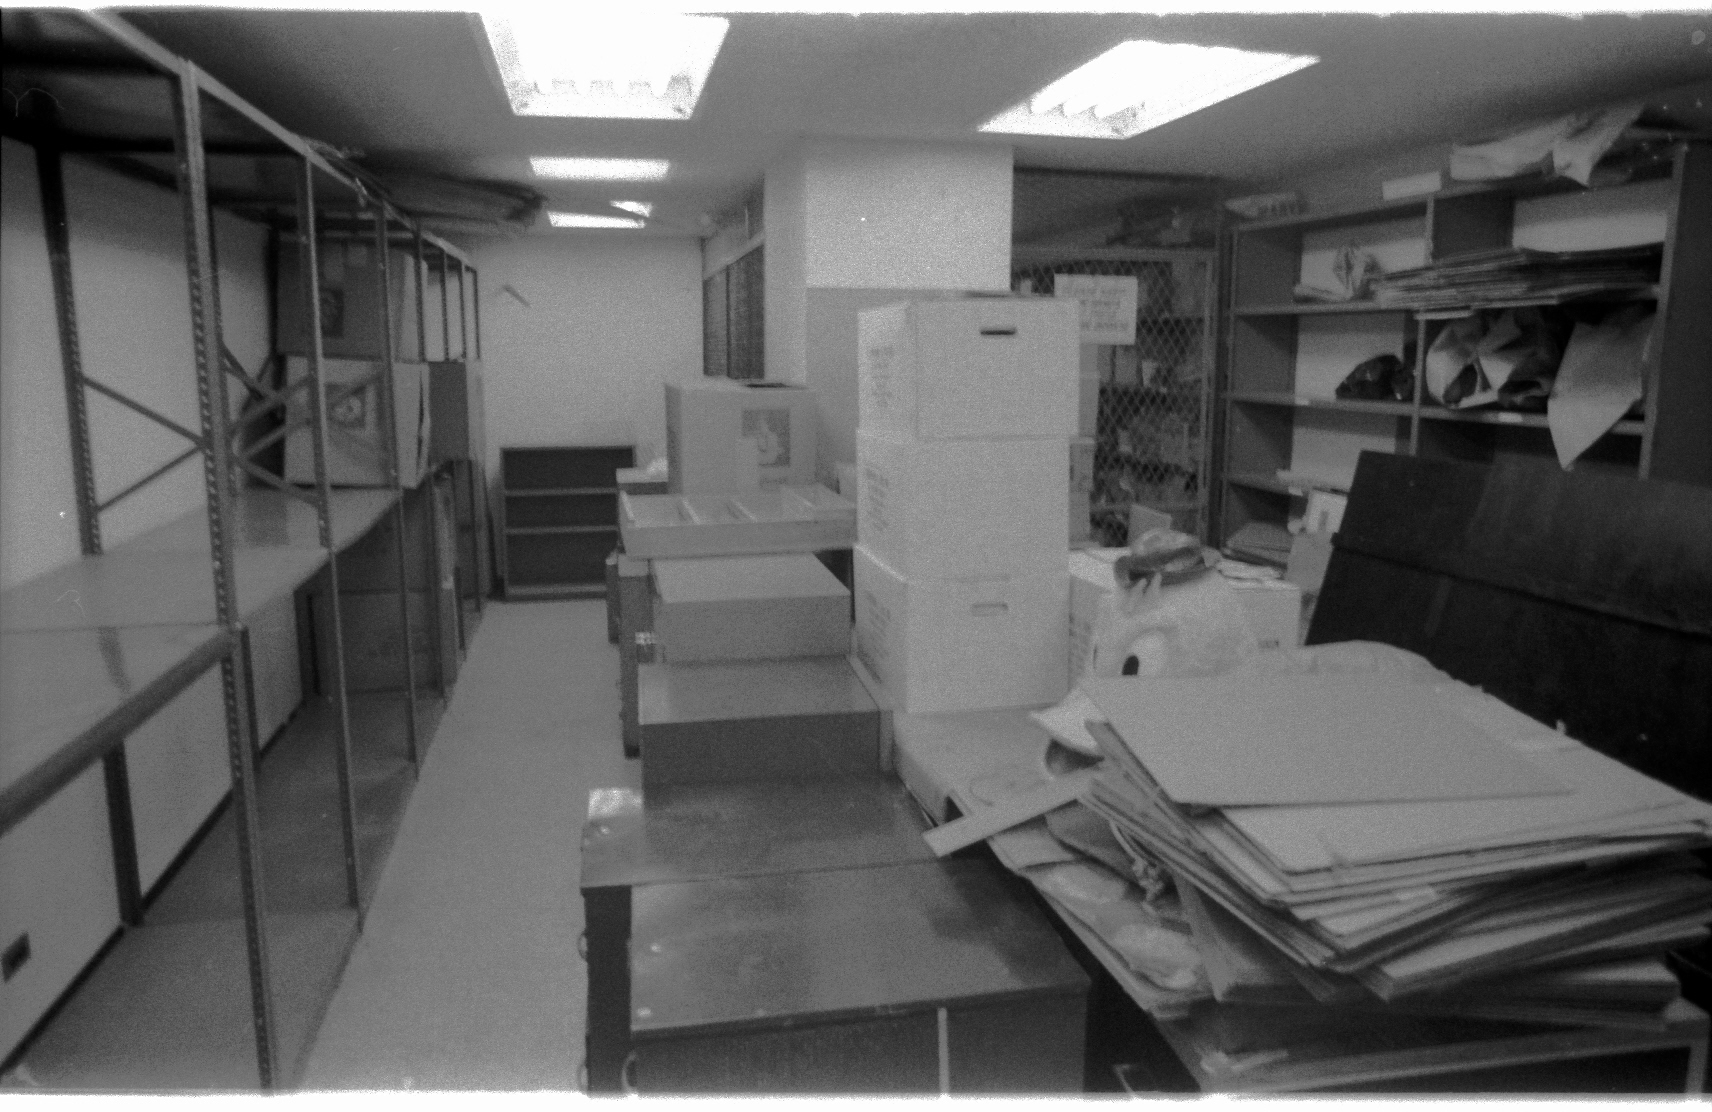 The supernaturally neat 9th Floor mailroom at 575 Madison Ave-- packed up neatly in a box, like never before. Sharp-eyed Marvelites may note a certain duck head amid the boxes... Marvel had a line of costumes worn by poor devils who appeared in them at store openings and sporting events. Some crazy idea of Marketing! This was, of course, a Howard the Duck costume! The business end of Marvel was up on 9.